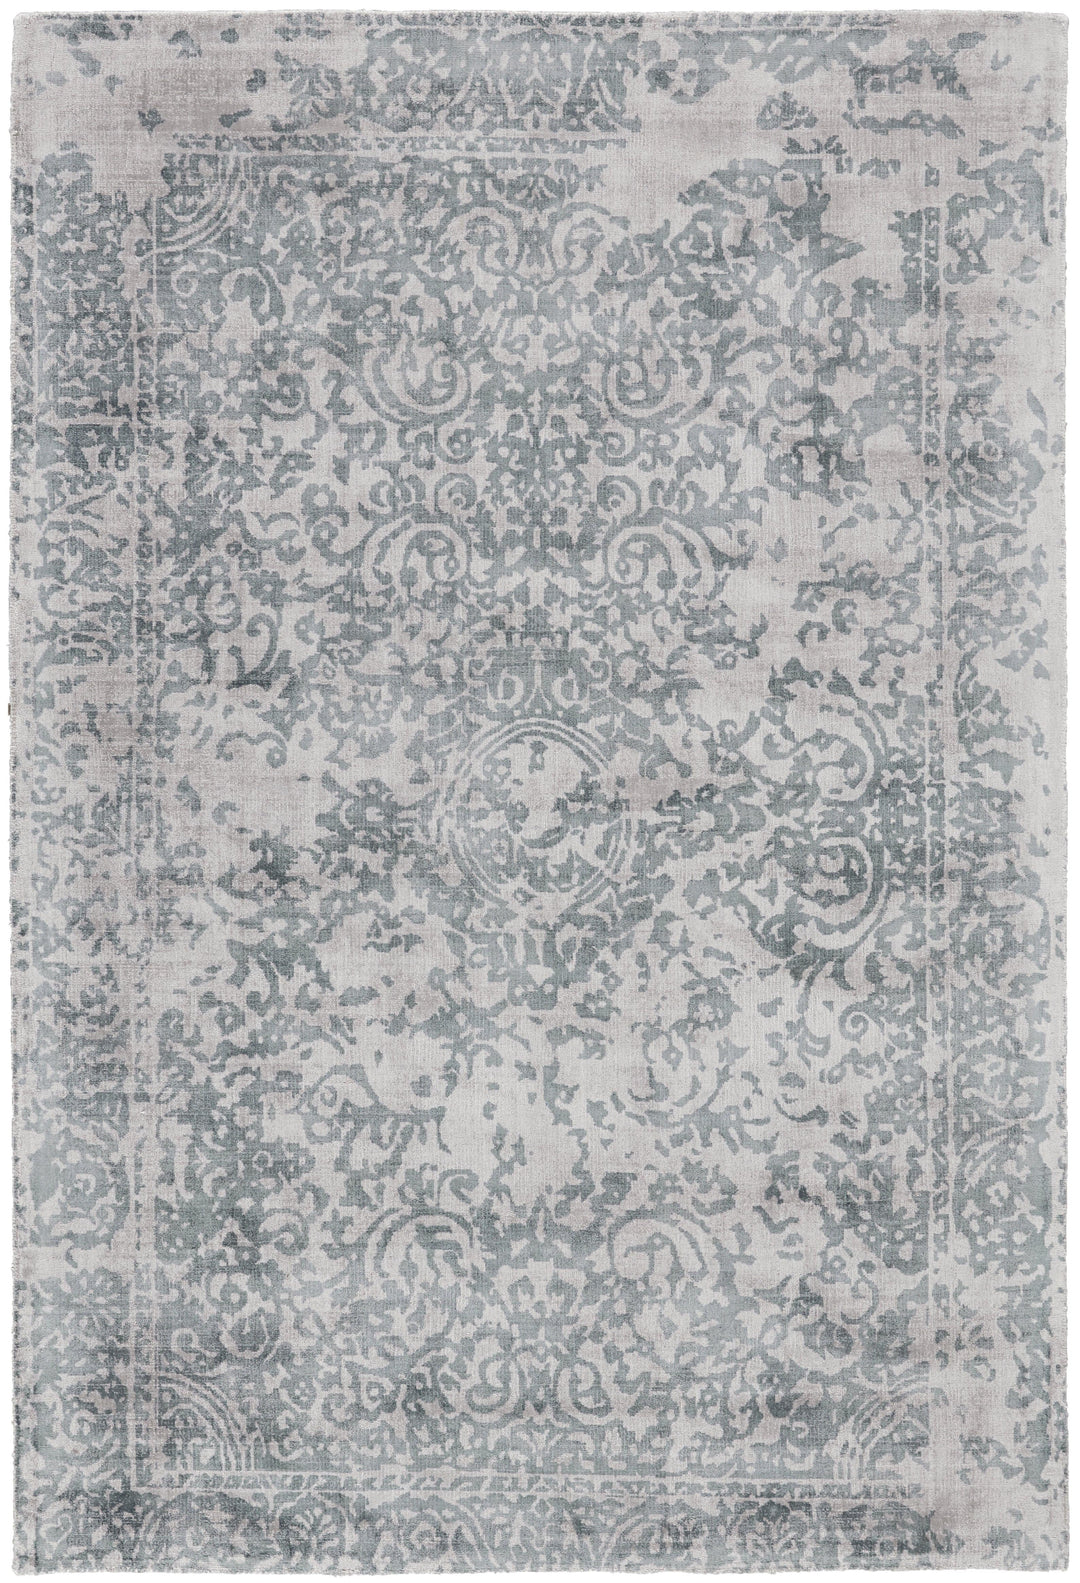 Feizy Feizy Nadia Distressed Damask Rug - Available in 4 Sizes - Blue & Gray Mist 3'-6" x 5'-6" 6678383FICE000C50